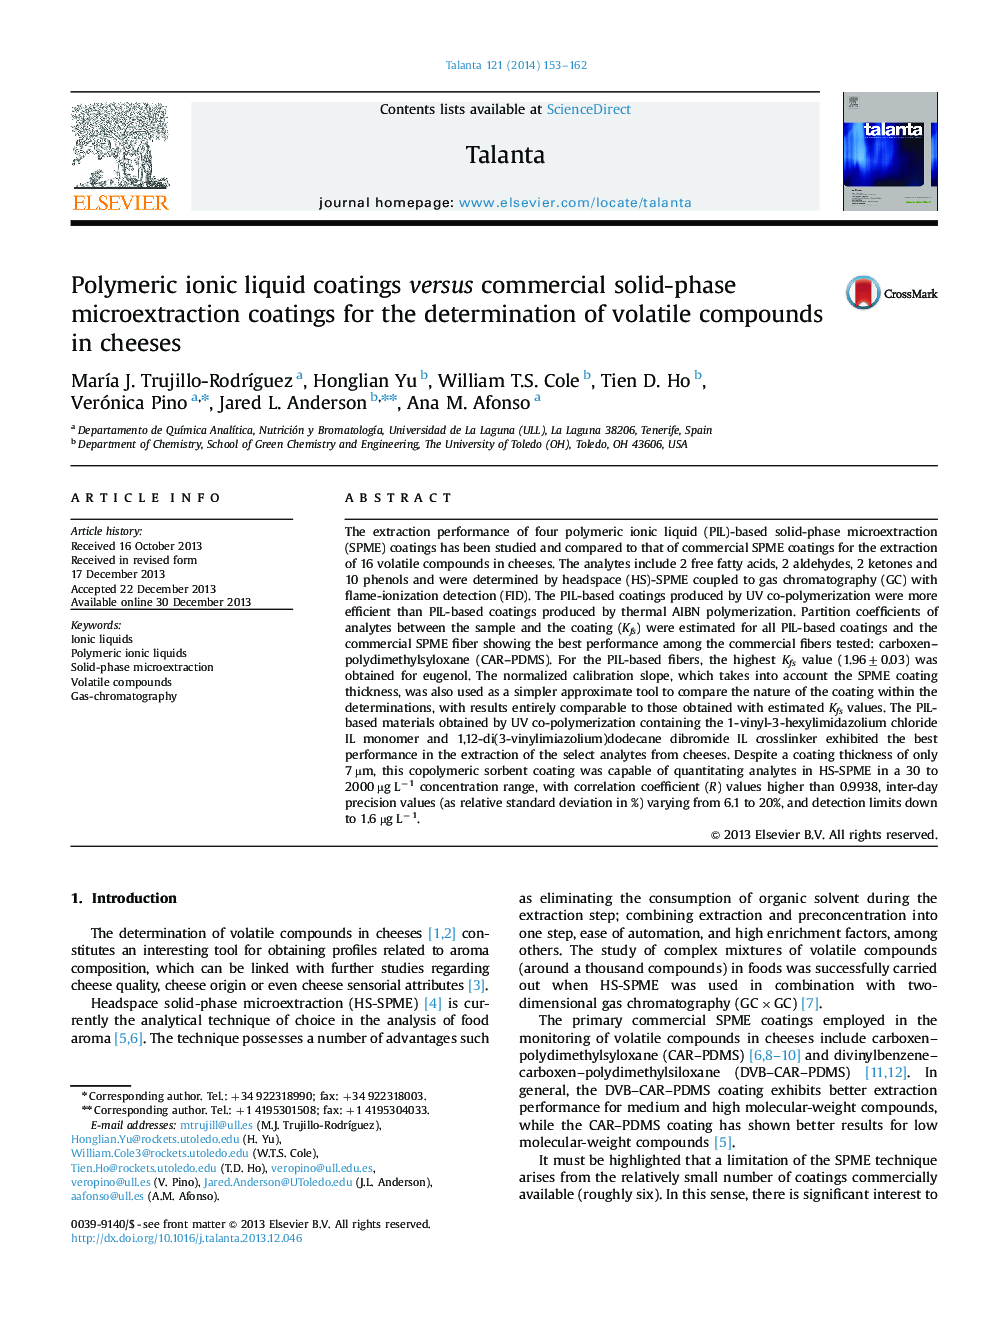 Polymeric ionic liquid coatings versus commercial solid-phase microextraction coatings for the determination of volatile compounds in cheeses